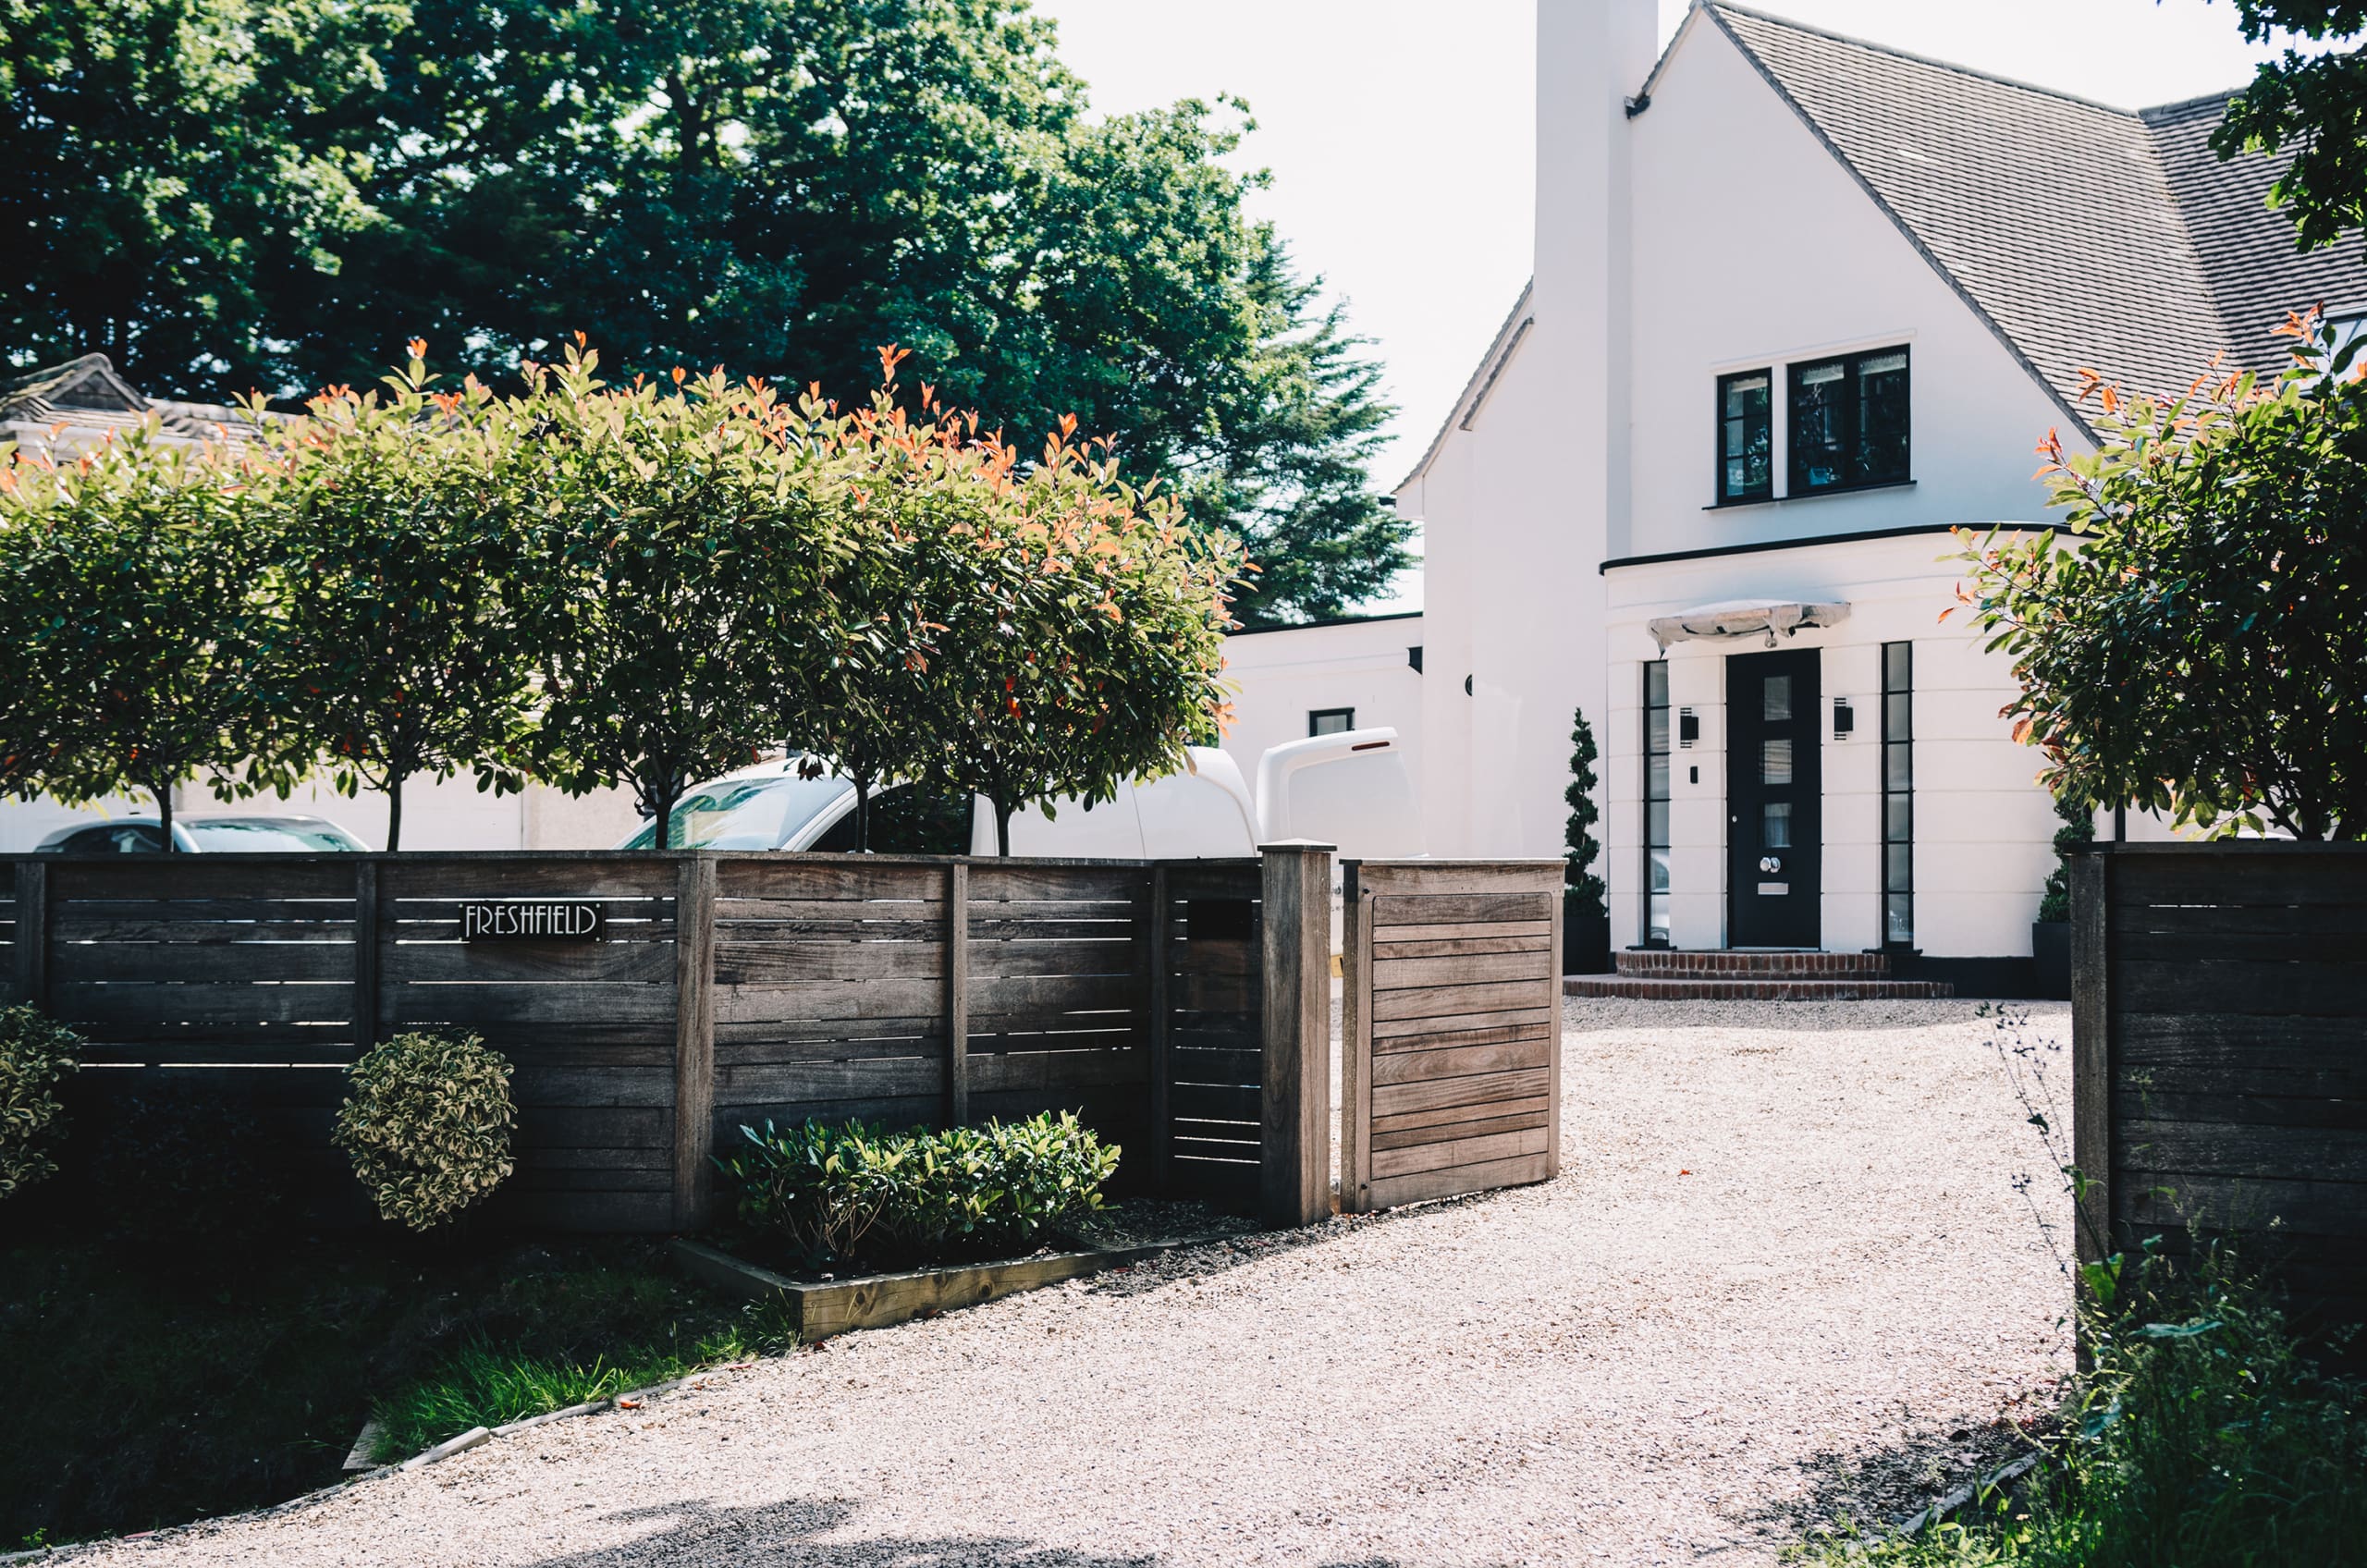 Art deco property in Lymington with gravel driveway and wooden gate.